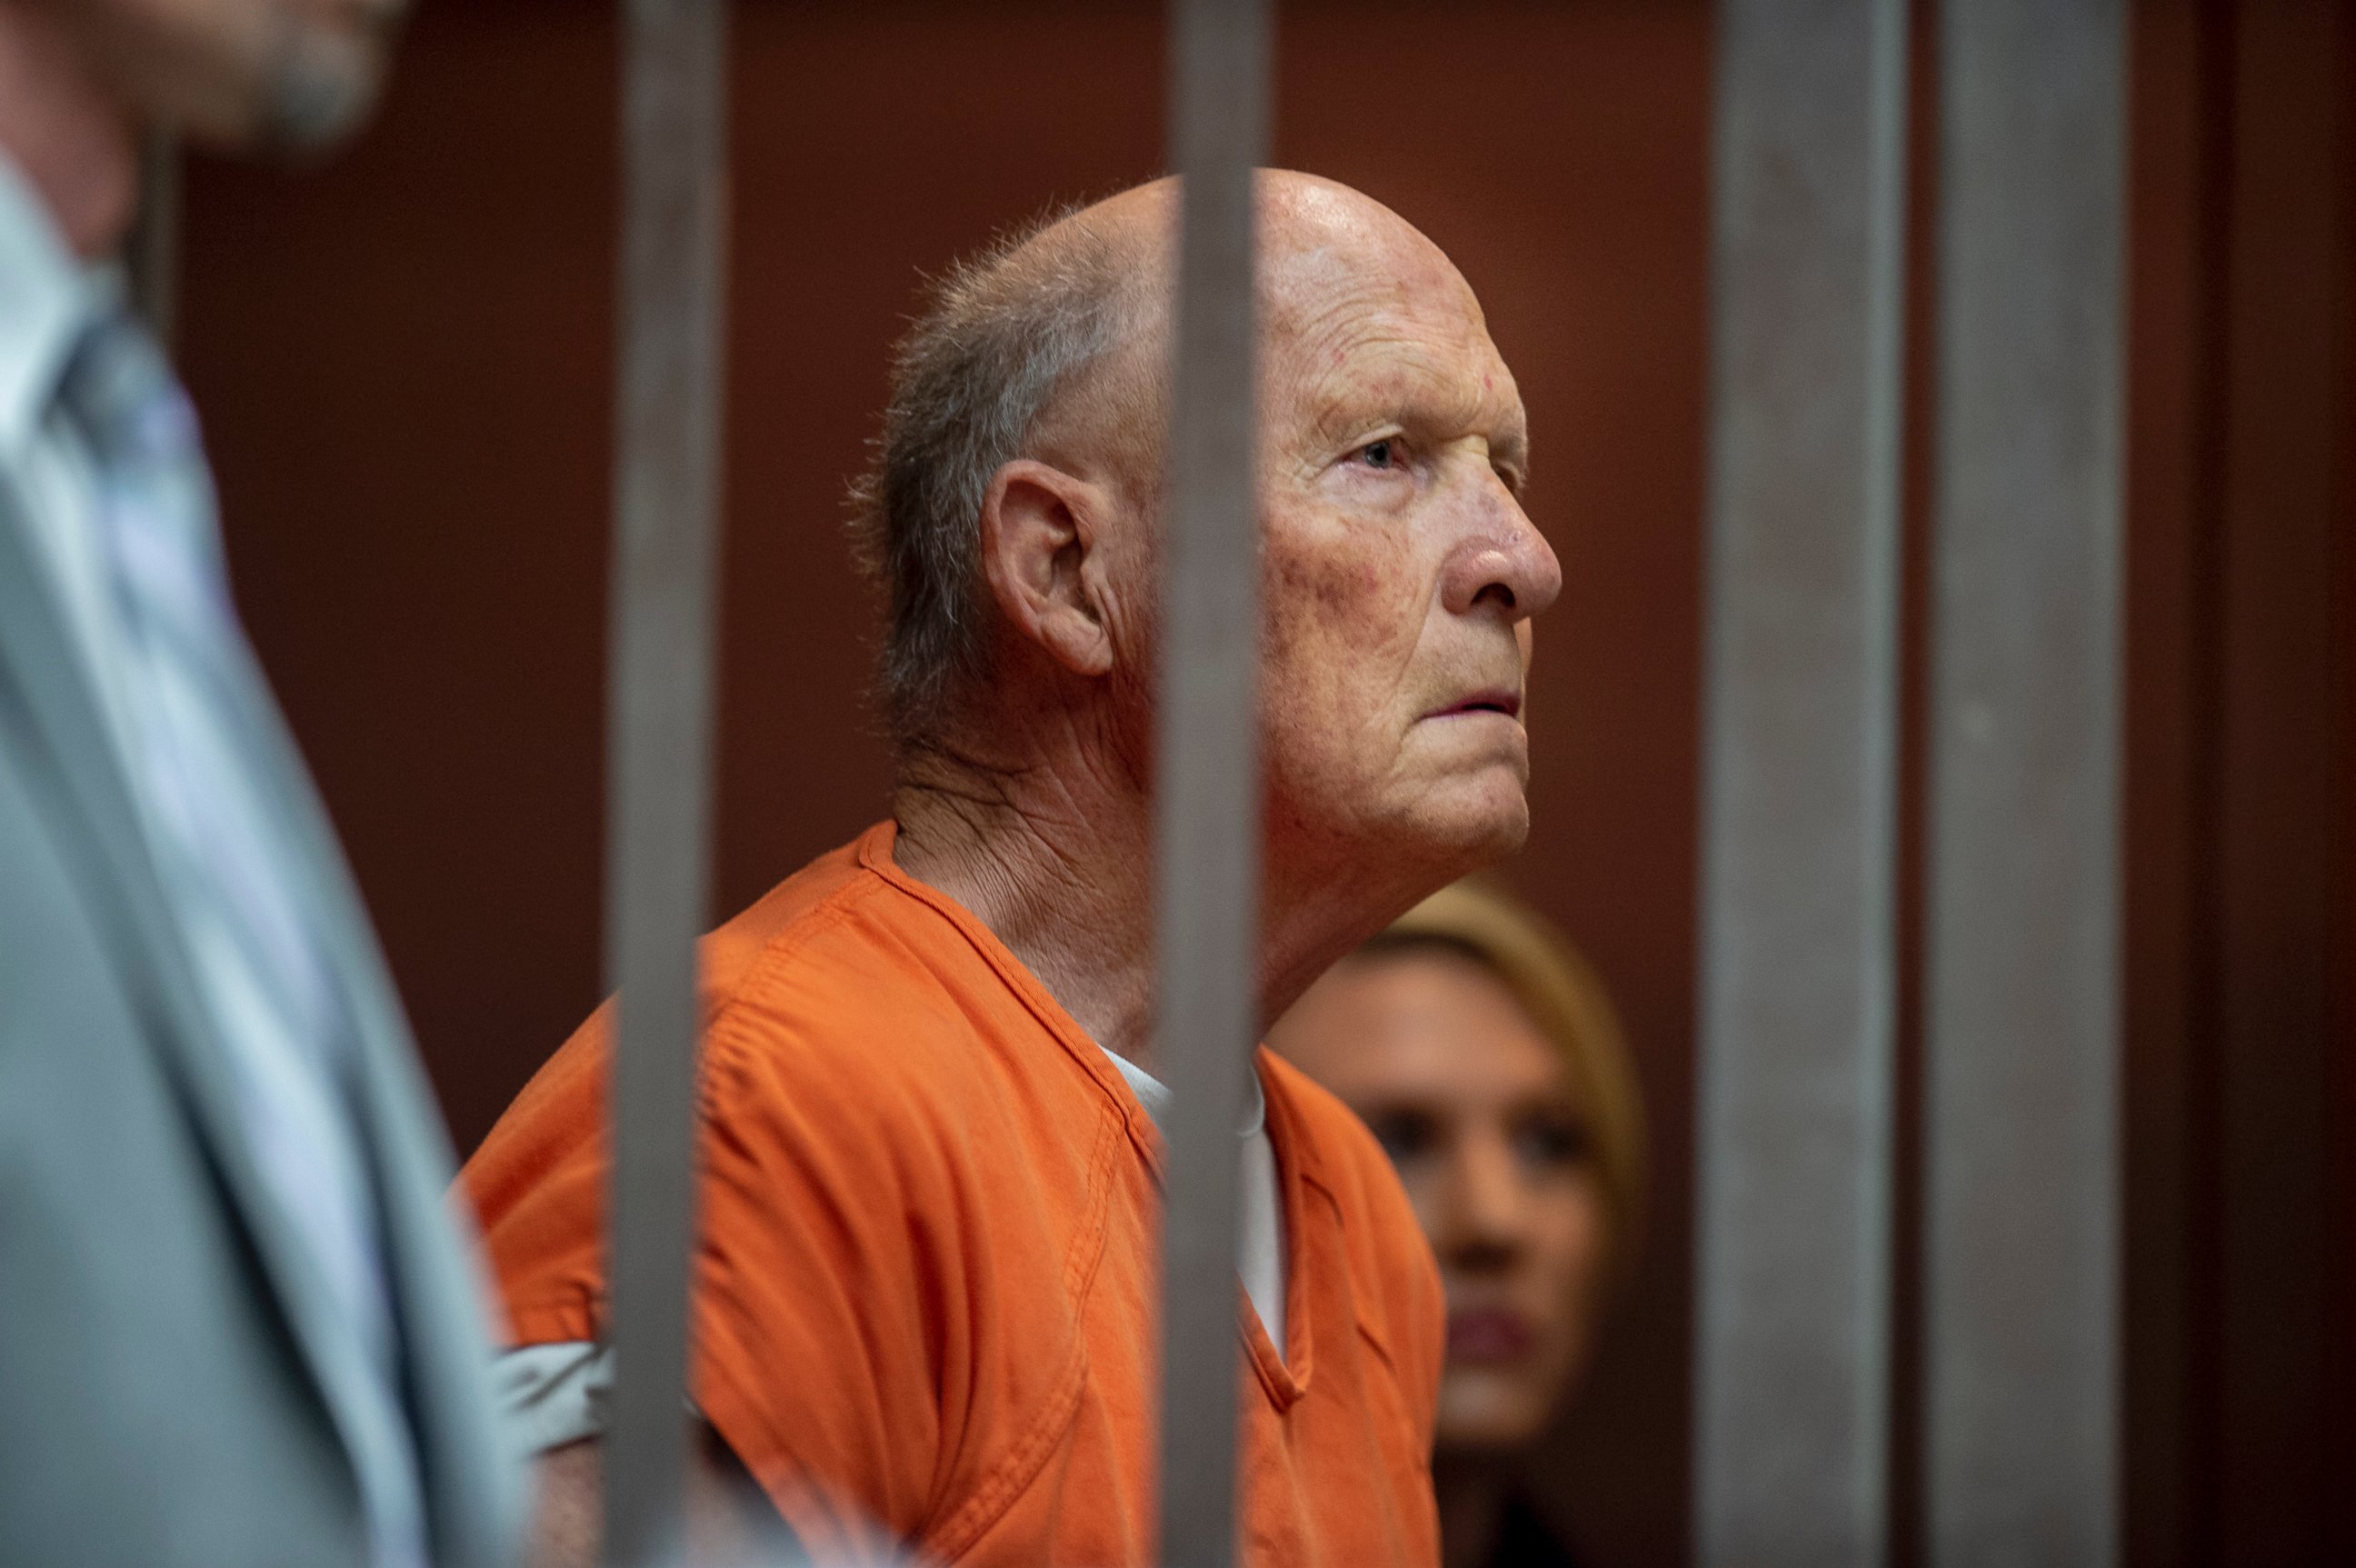 Joseph James DeAngelo appears in Sacramento Superior Court, Friday, June 1, 2018, in Sacramento, Calif. He is suspected in at least a dozen killings and roughly 50 rapes in the 1970s and '80s.